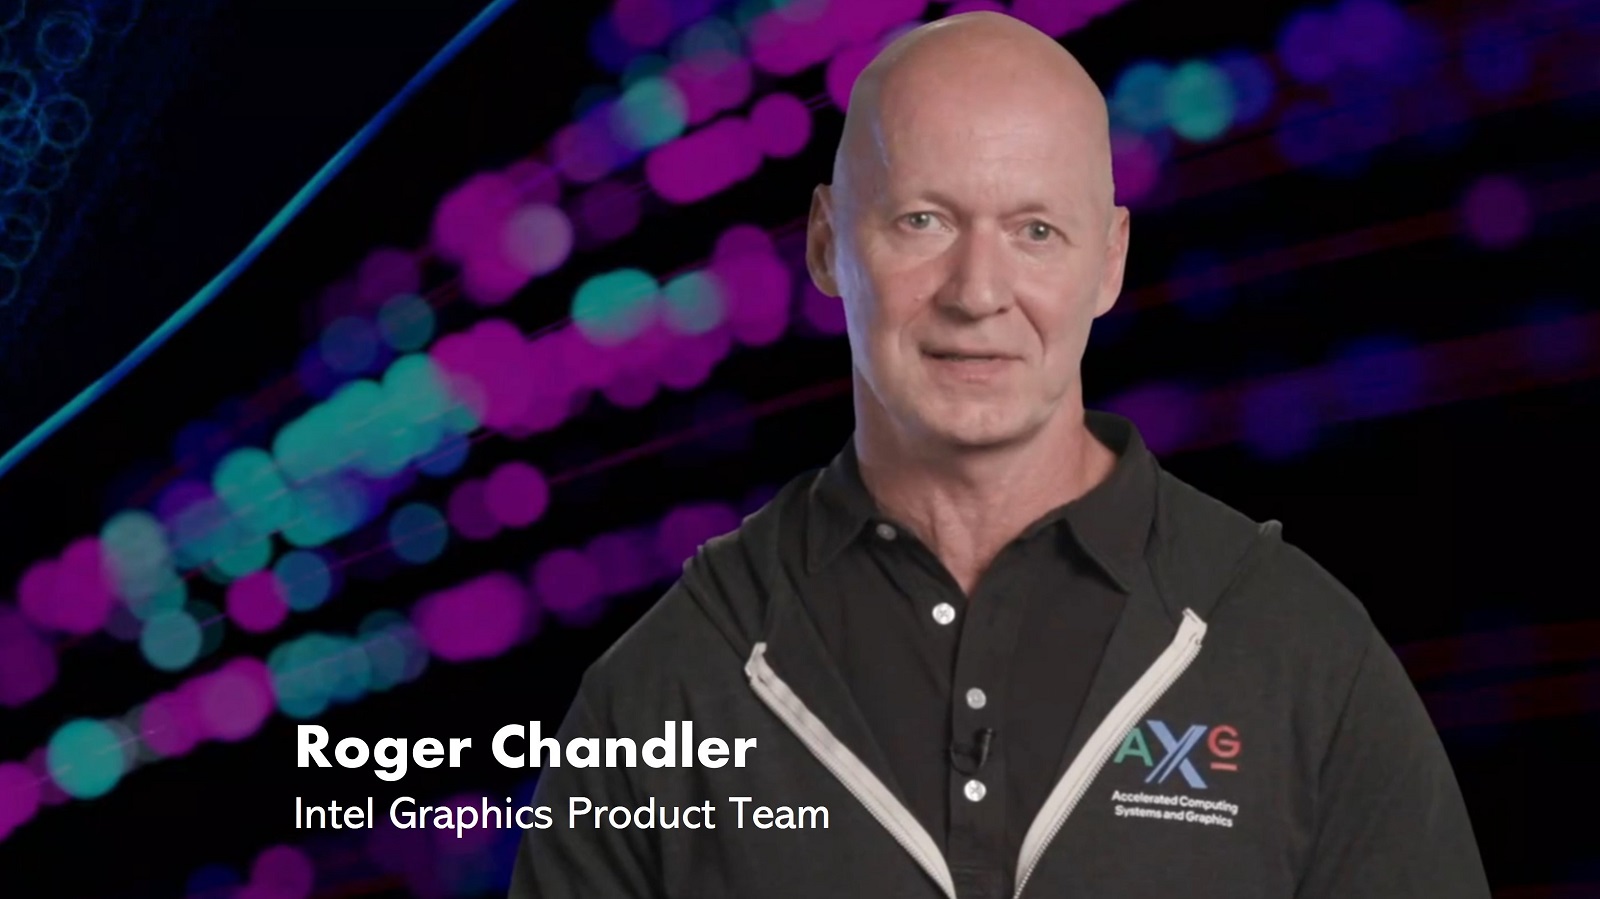 Roger Chandler, Intel Graphics Product Team